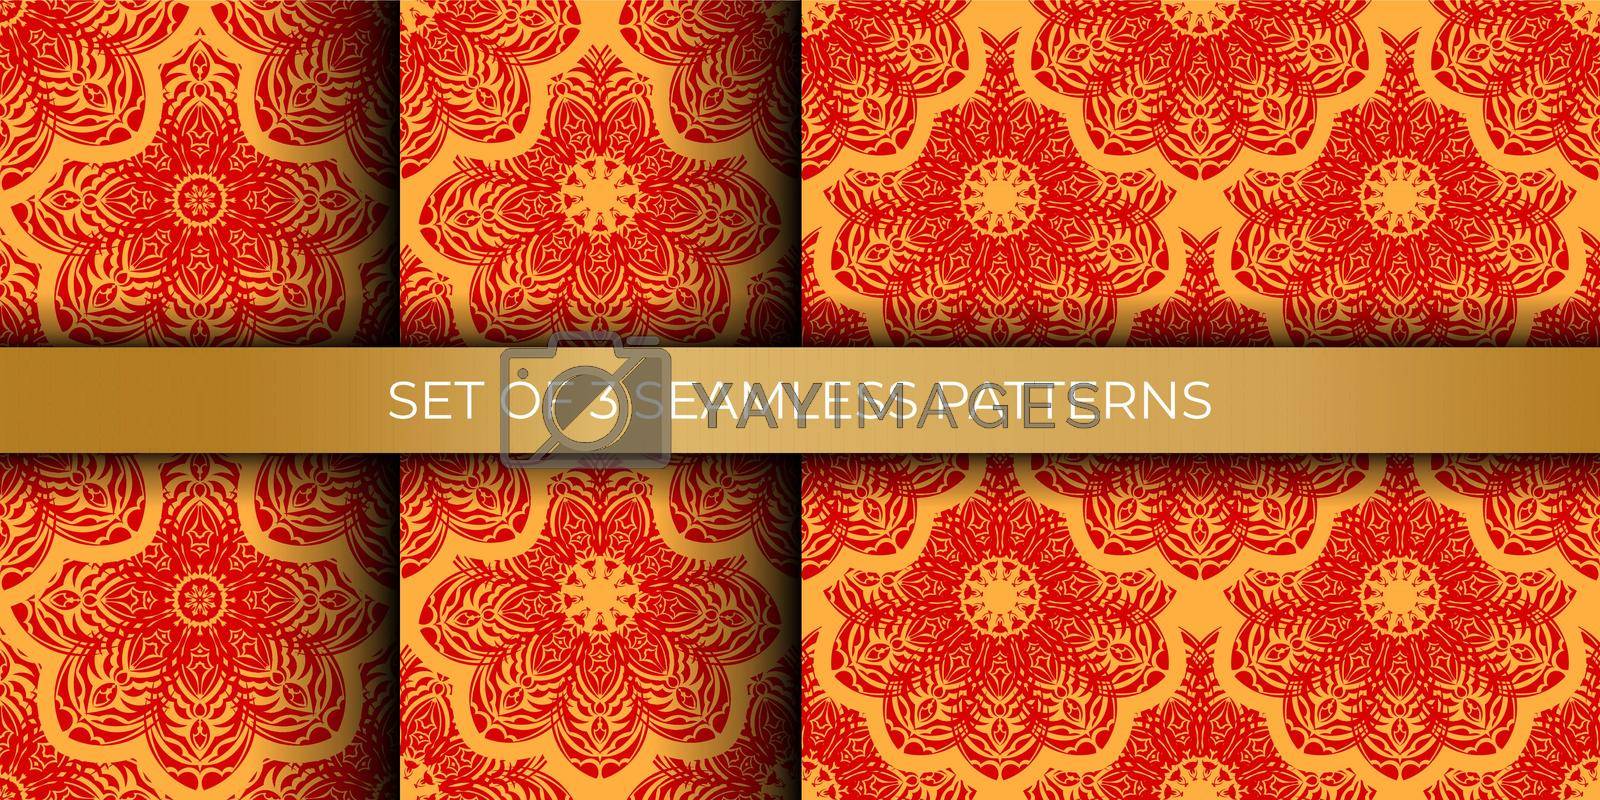 Set of red and yellow seamless pattern with vintage ornament. Good for clothing, textiles, backgrounds and prints. Vector illustration.